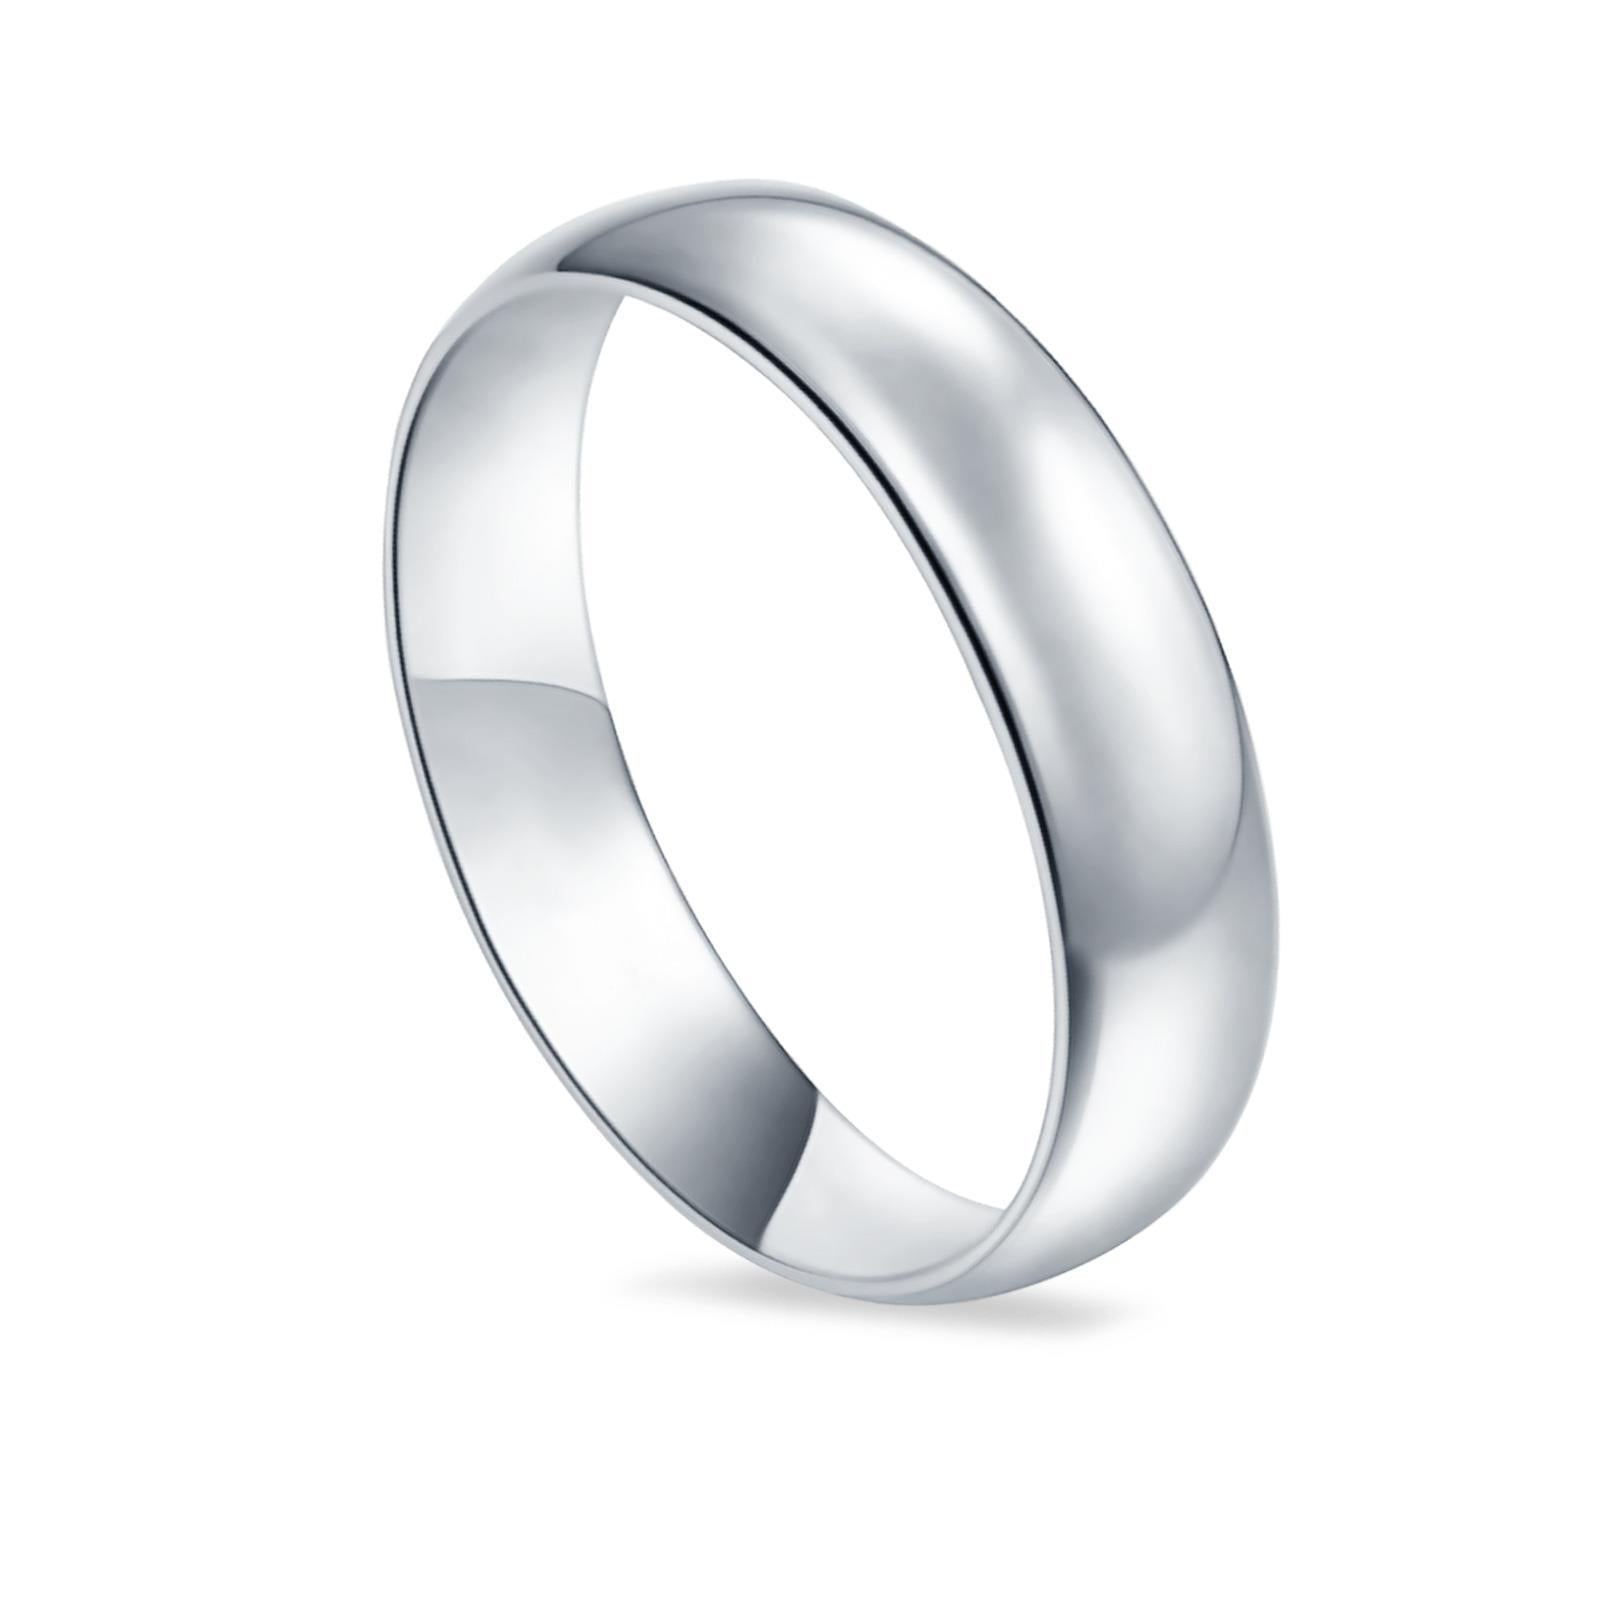 Sterling Silver Wedding Band Ring Round 925 Sterling Silver (5MM)